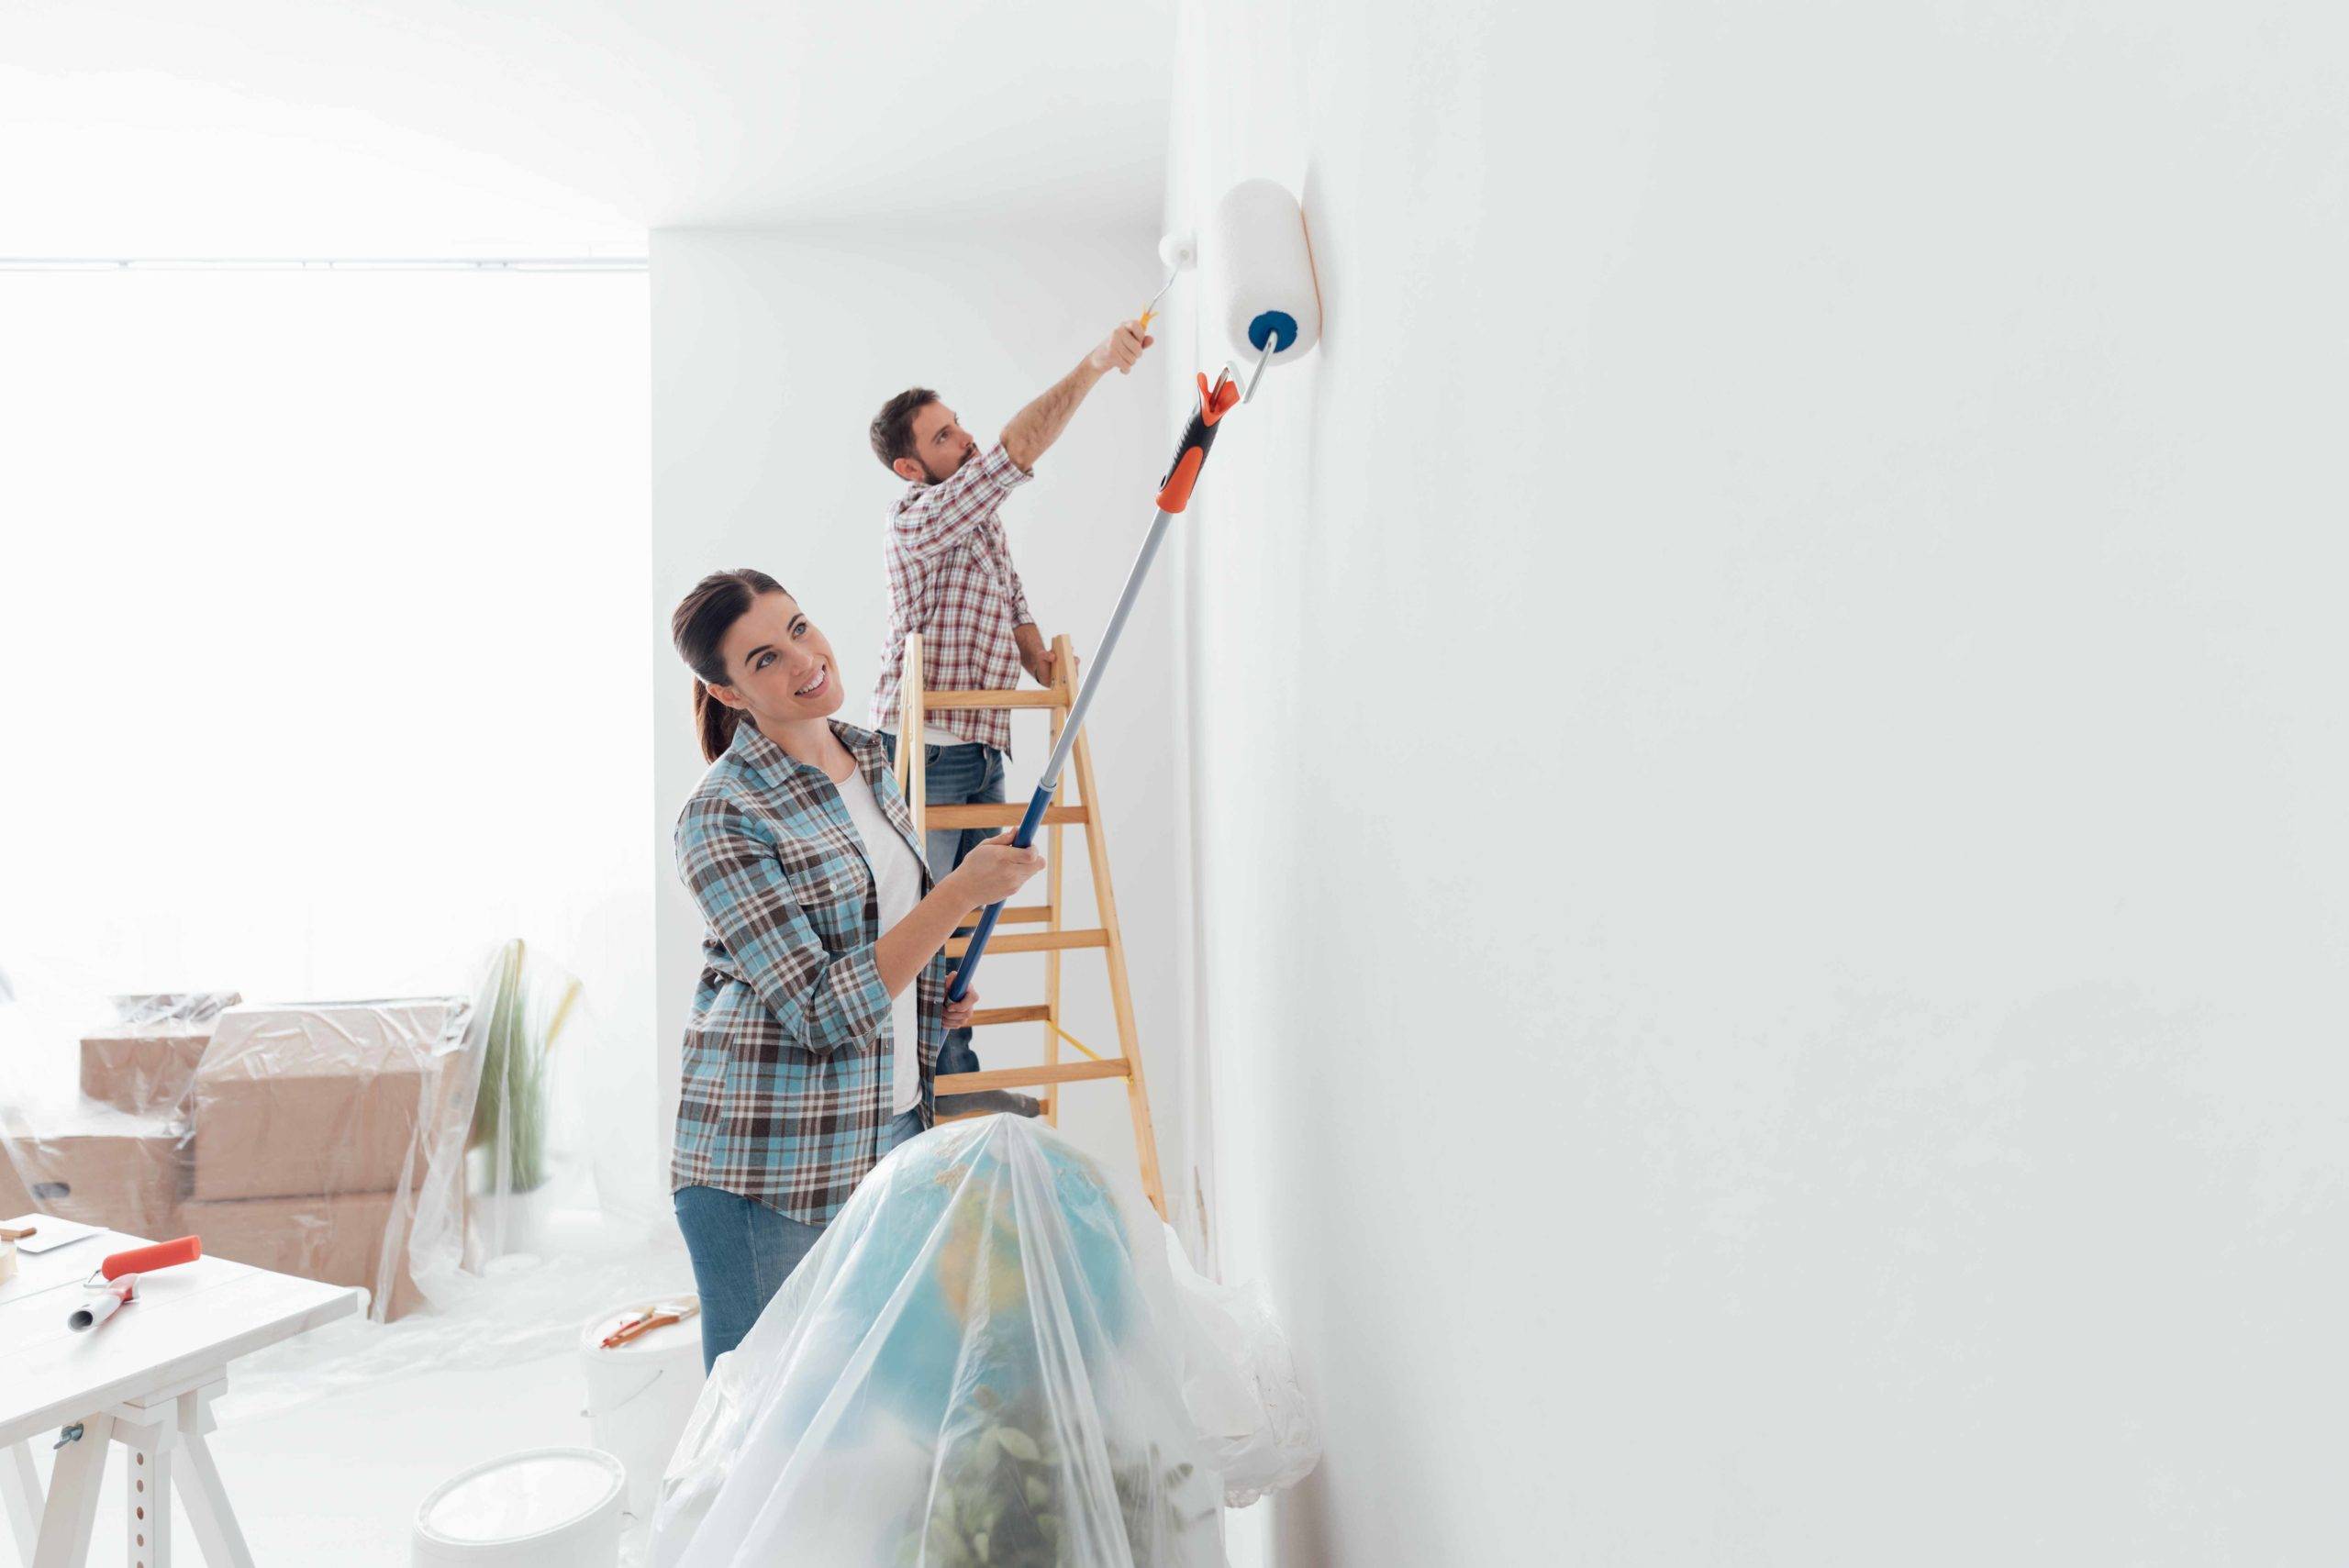 10 Tips On How to Clean Walls  The Best Way To Clean Walls - The